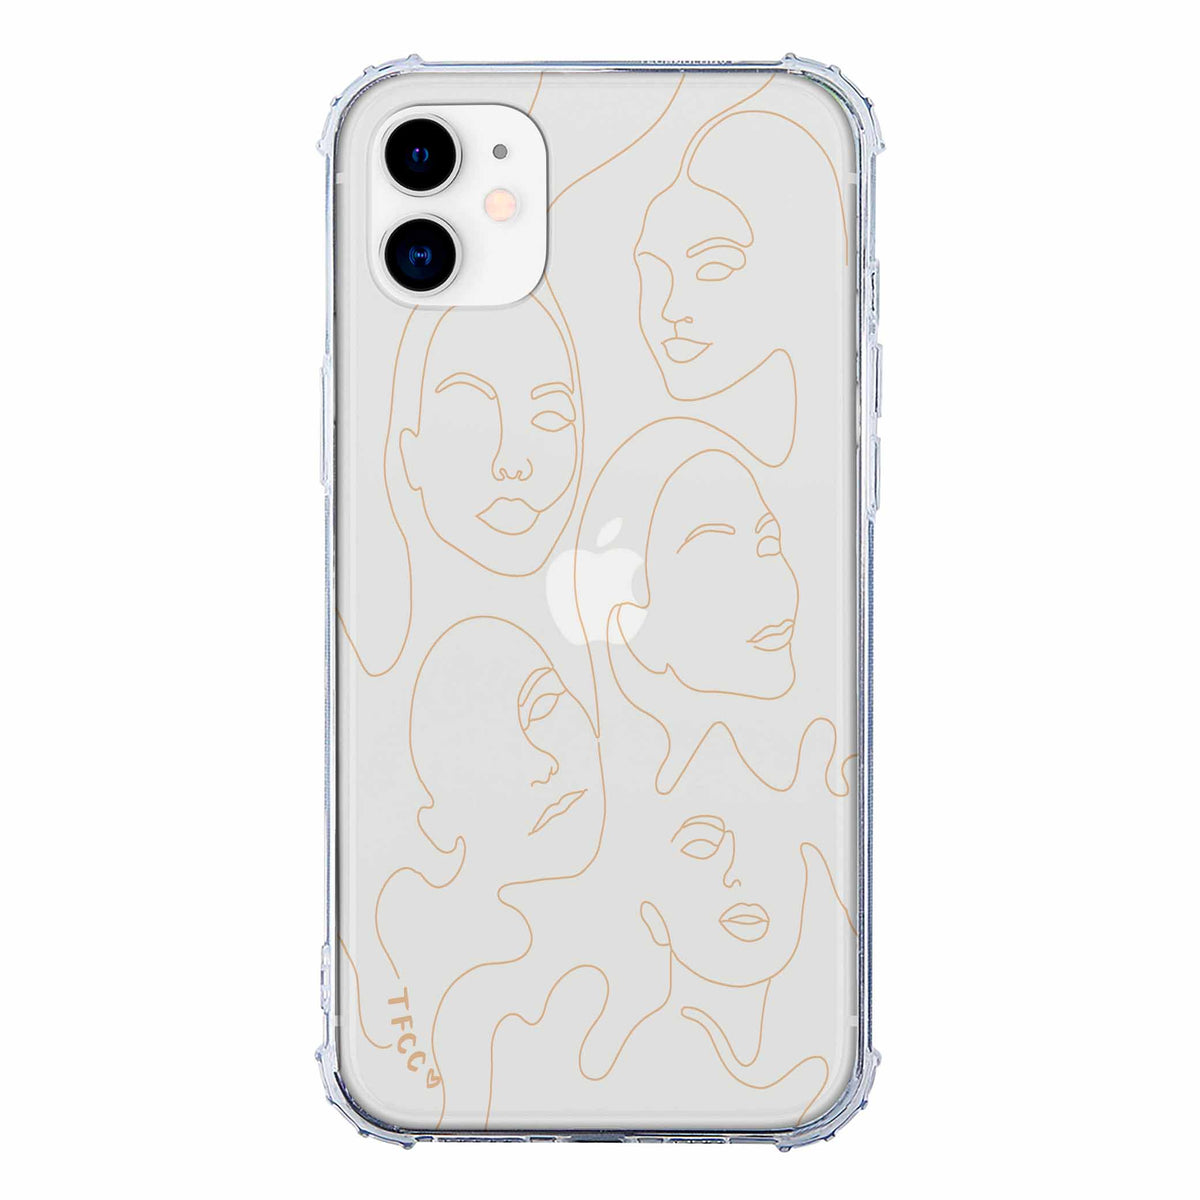 ABSTRACT FACE CLEAR CASE - thefonecasecompany